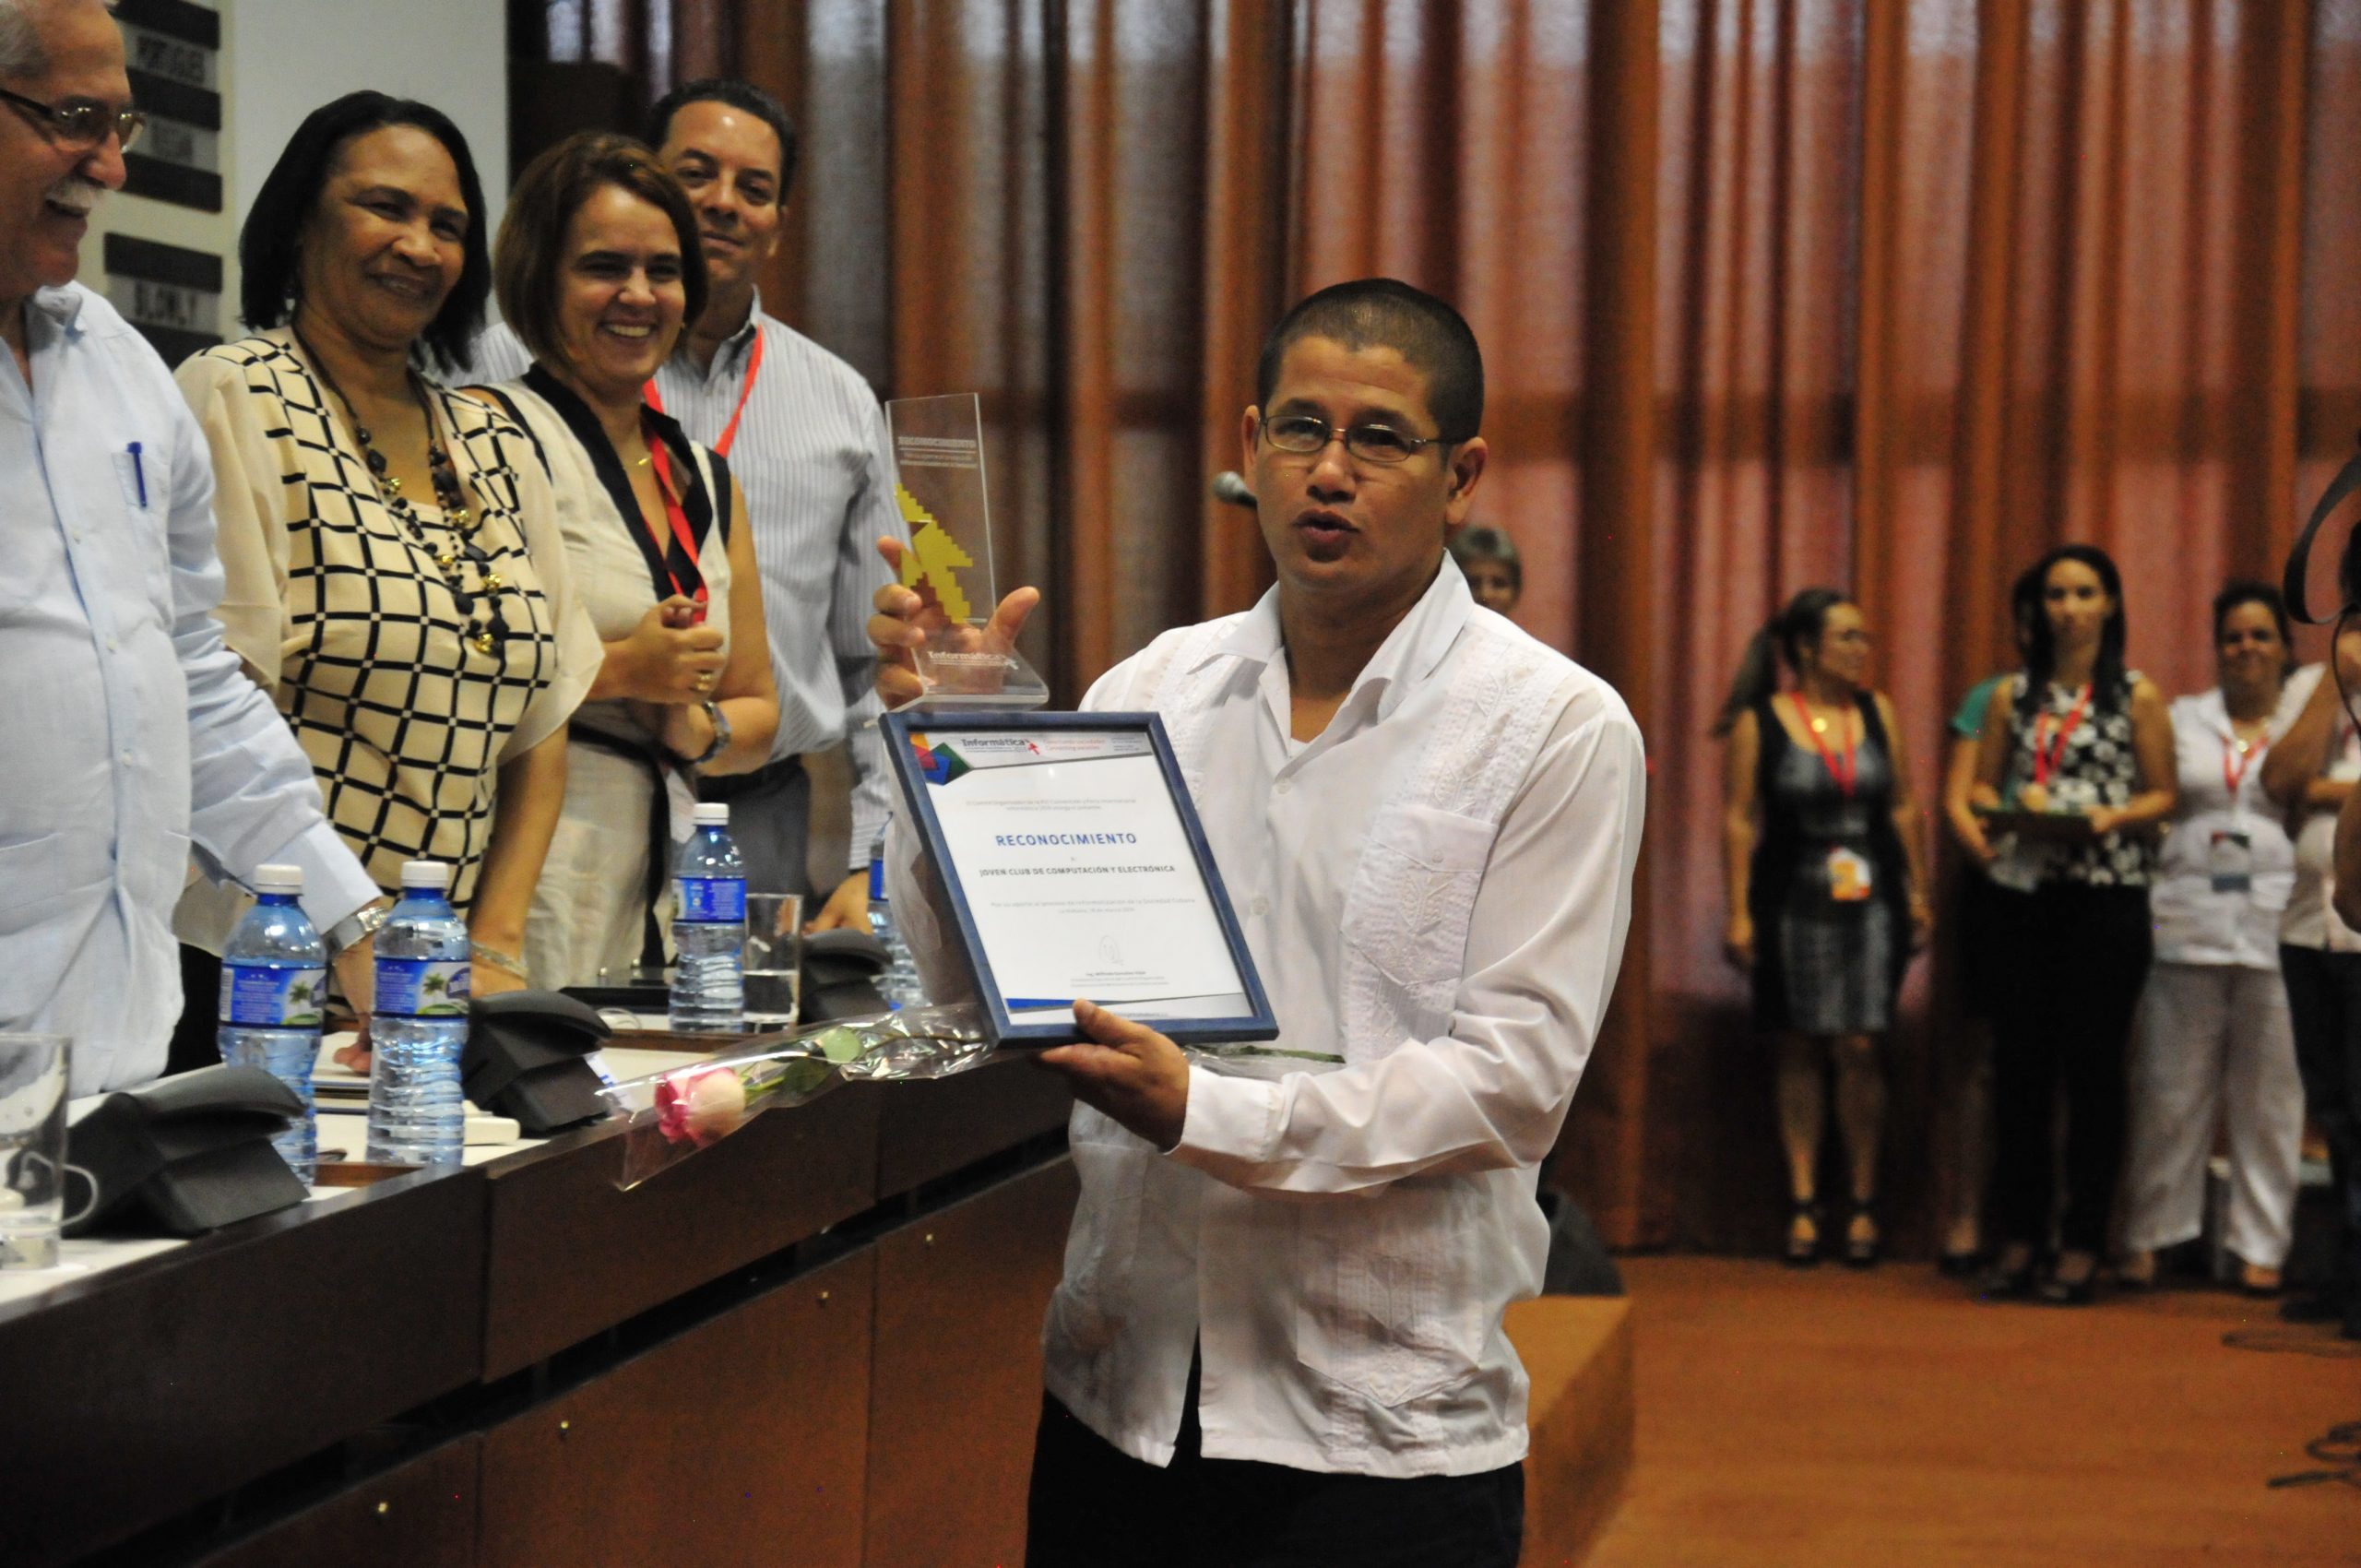 2016 The then General Director, Raúl Vantroi, receives an award for the Young Computing Club